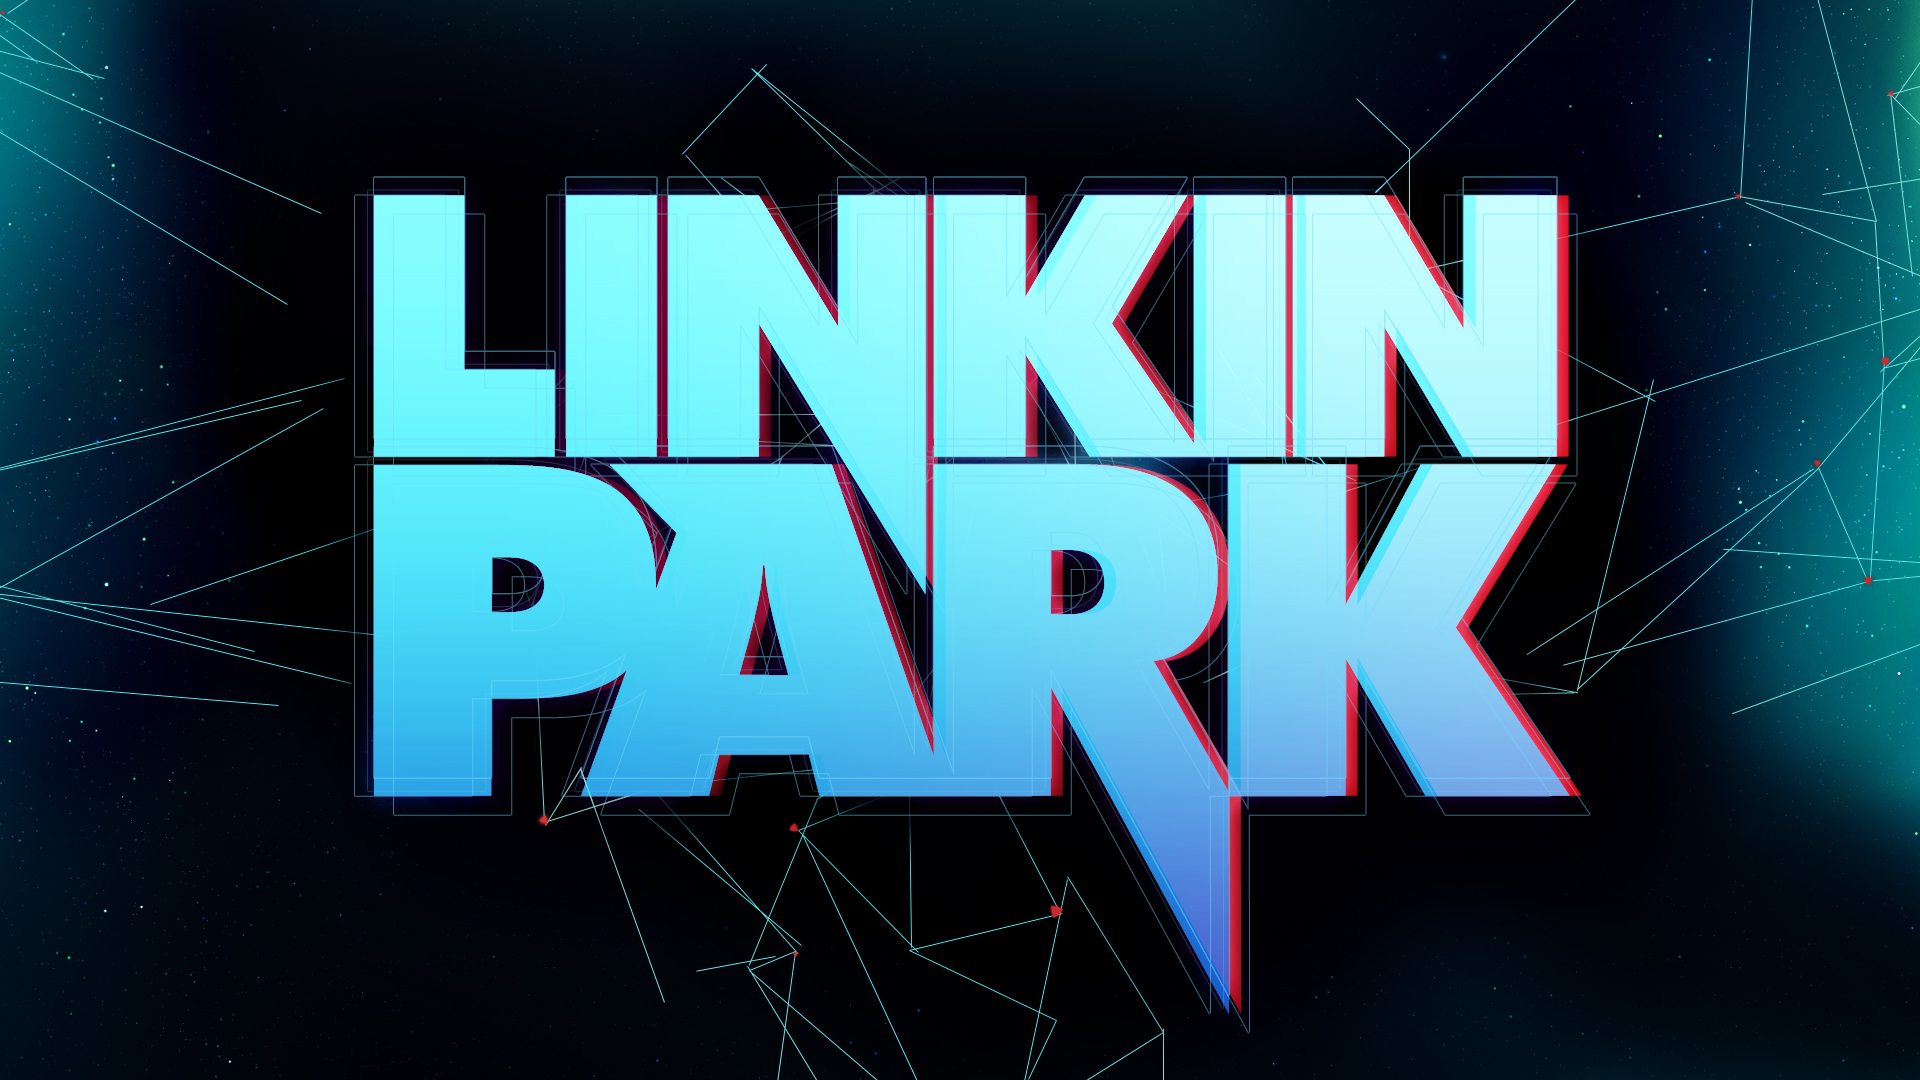 Linkin Park Wallpapers, Pictures, Images